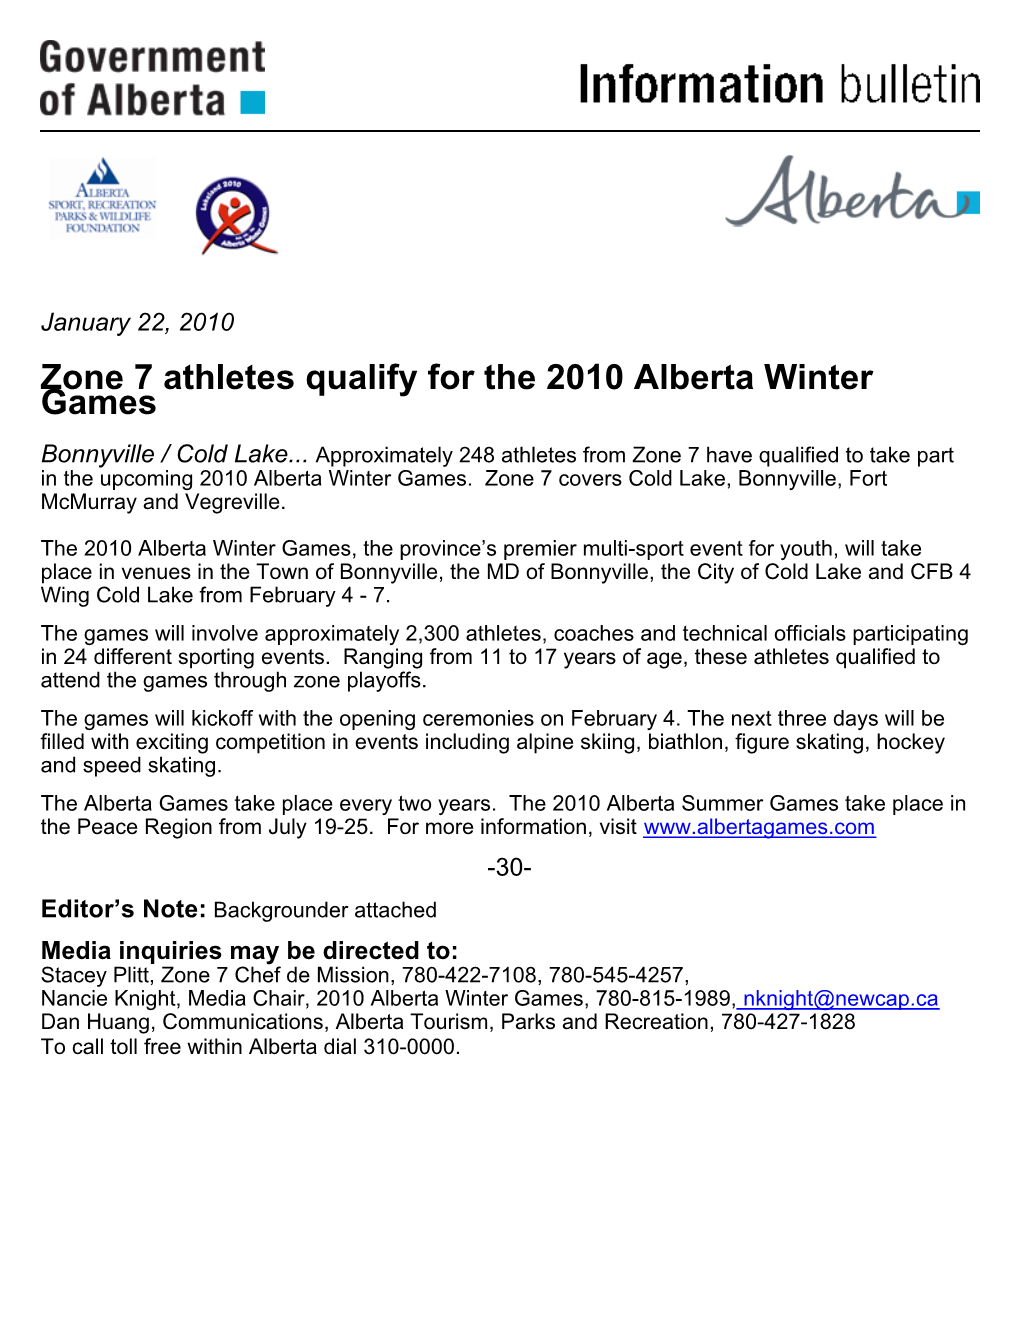 Zone 7 Athletes Qualify for the 2010 Alberta Winter Games